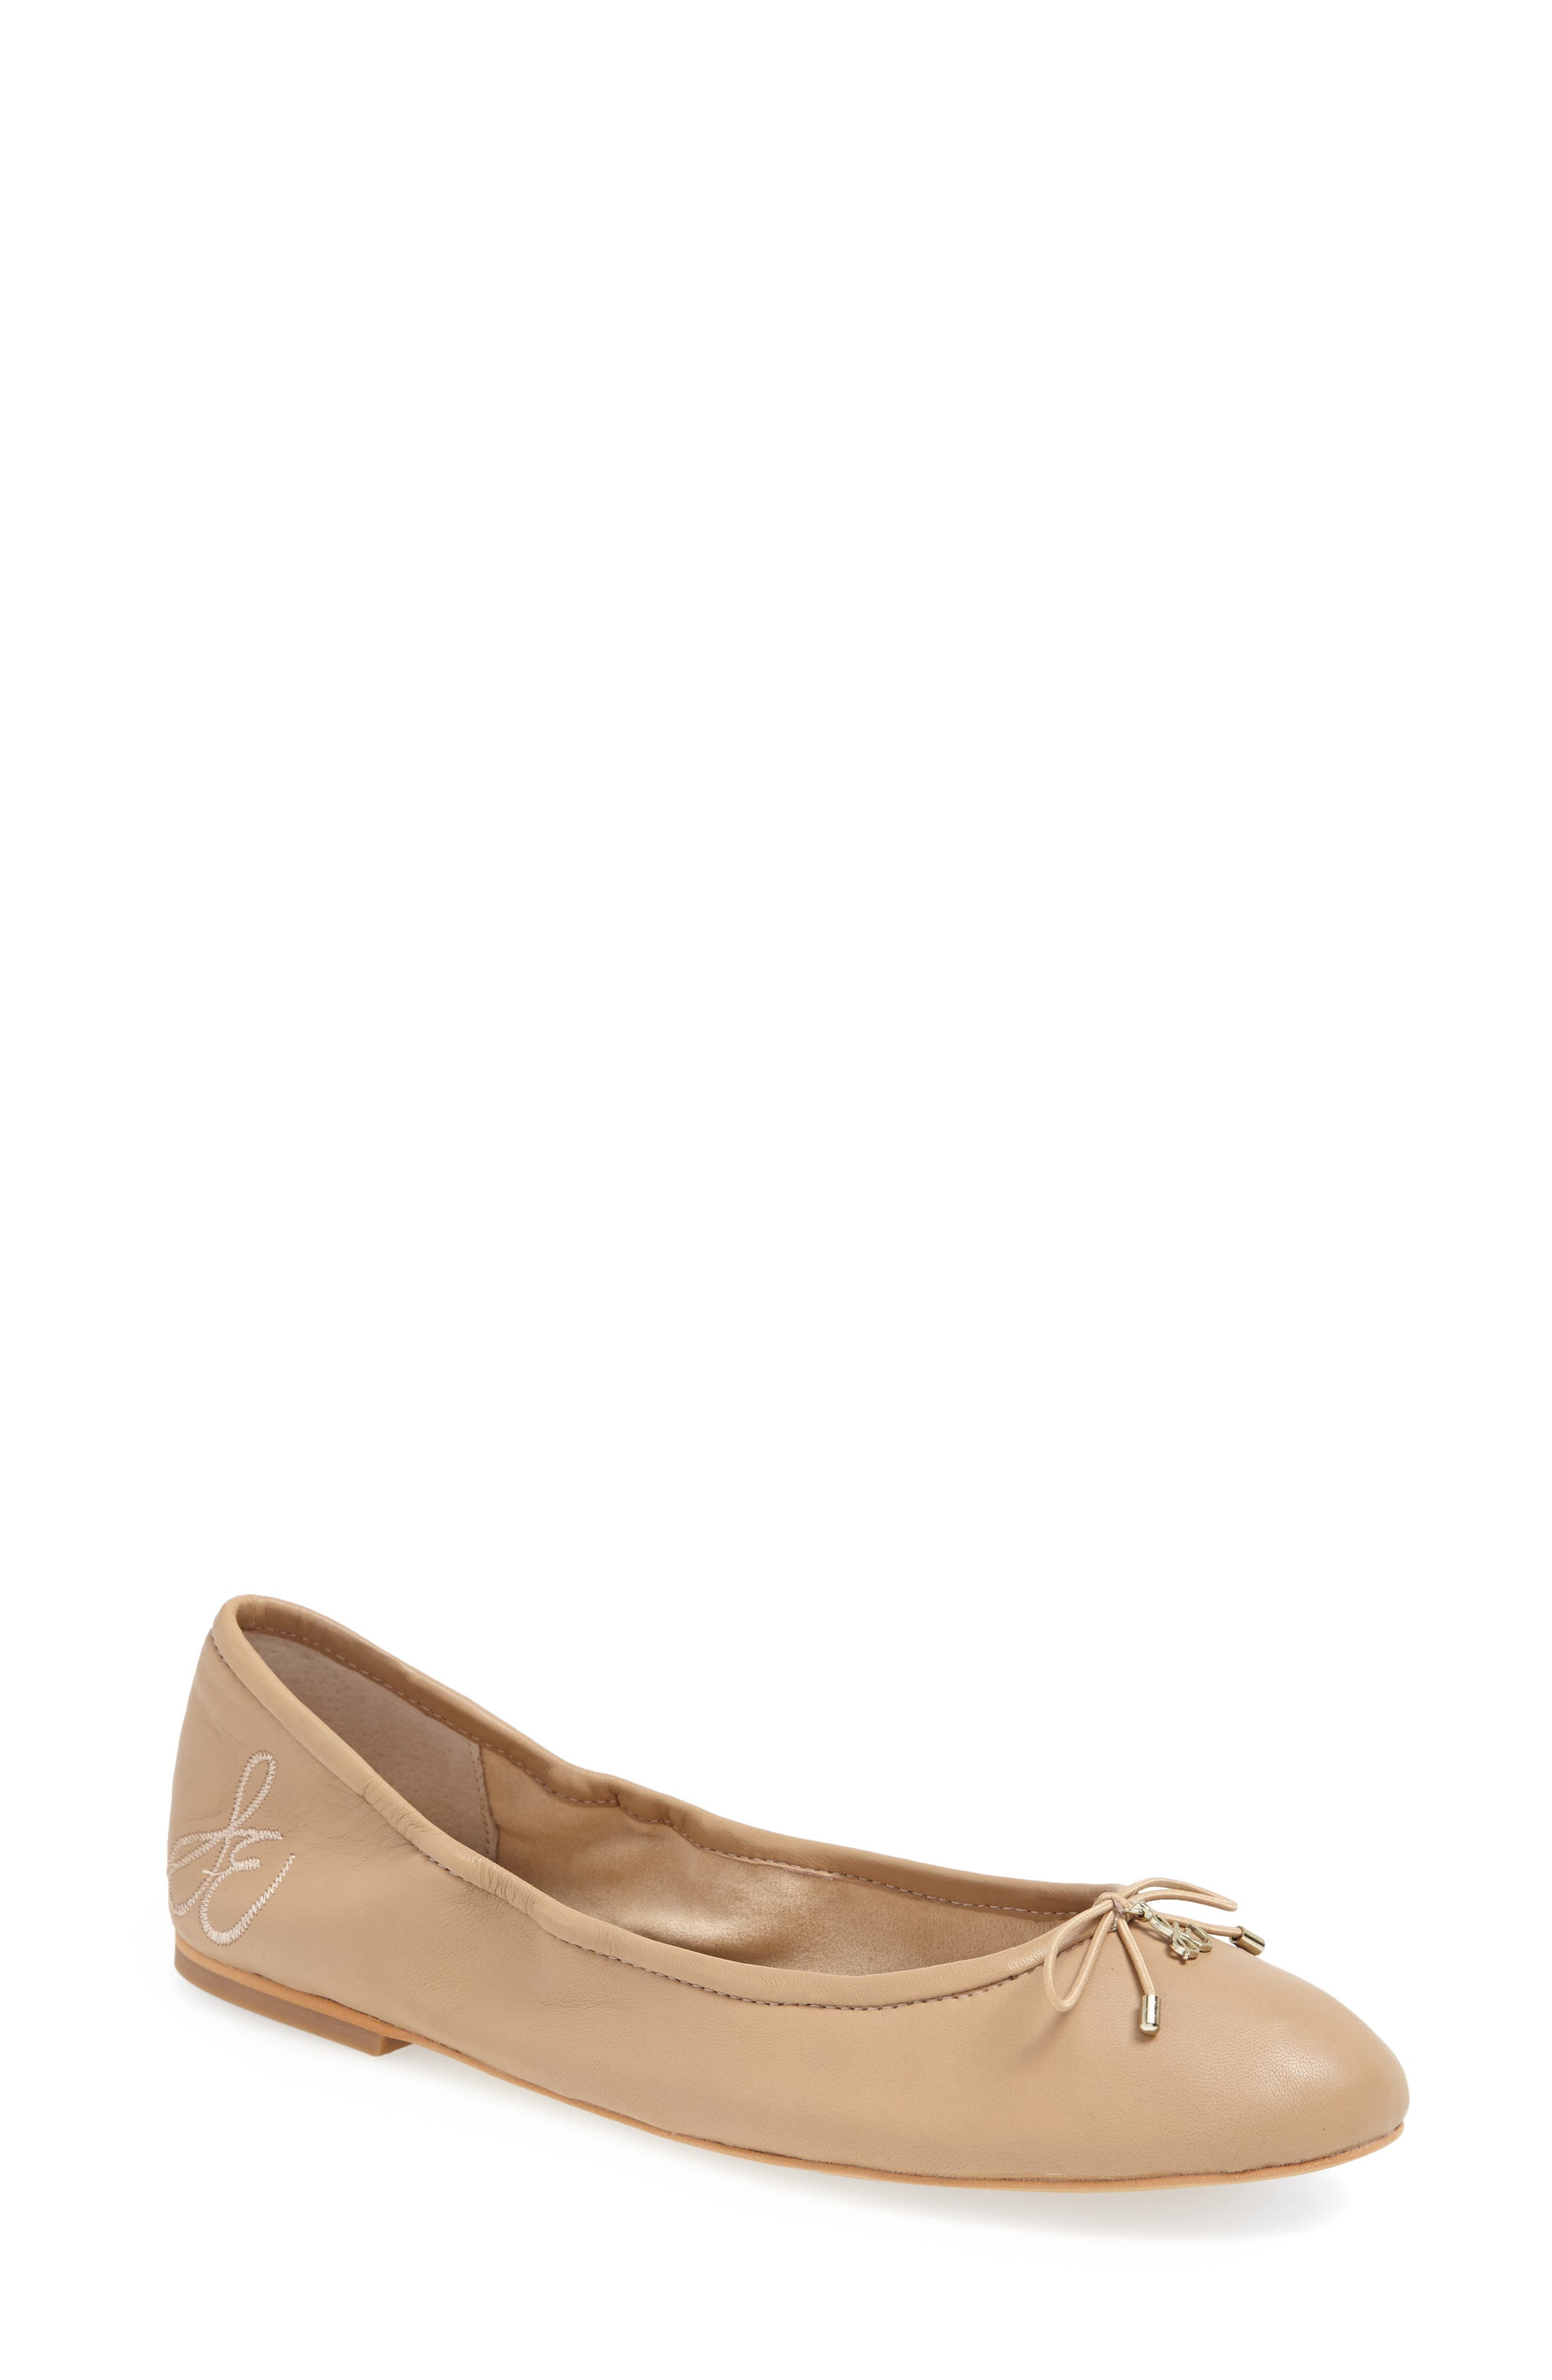 nordstrom flat shoes